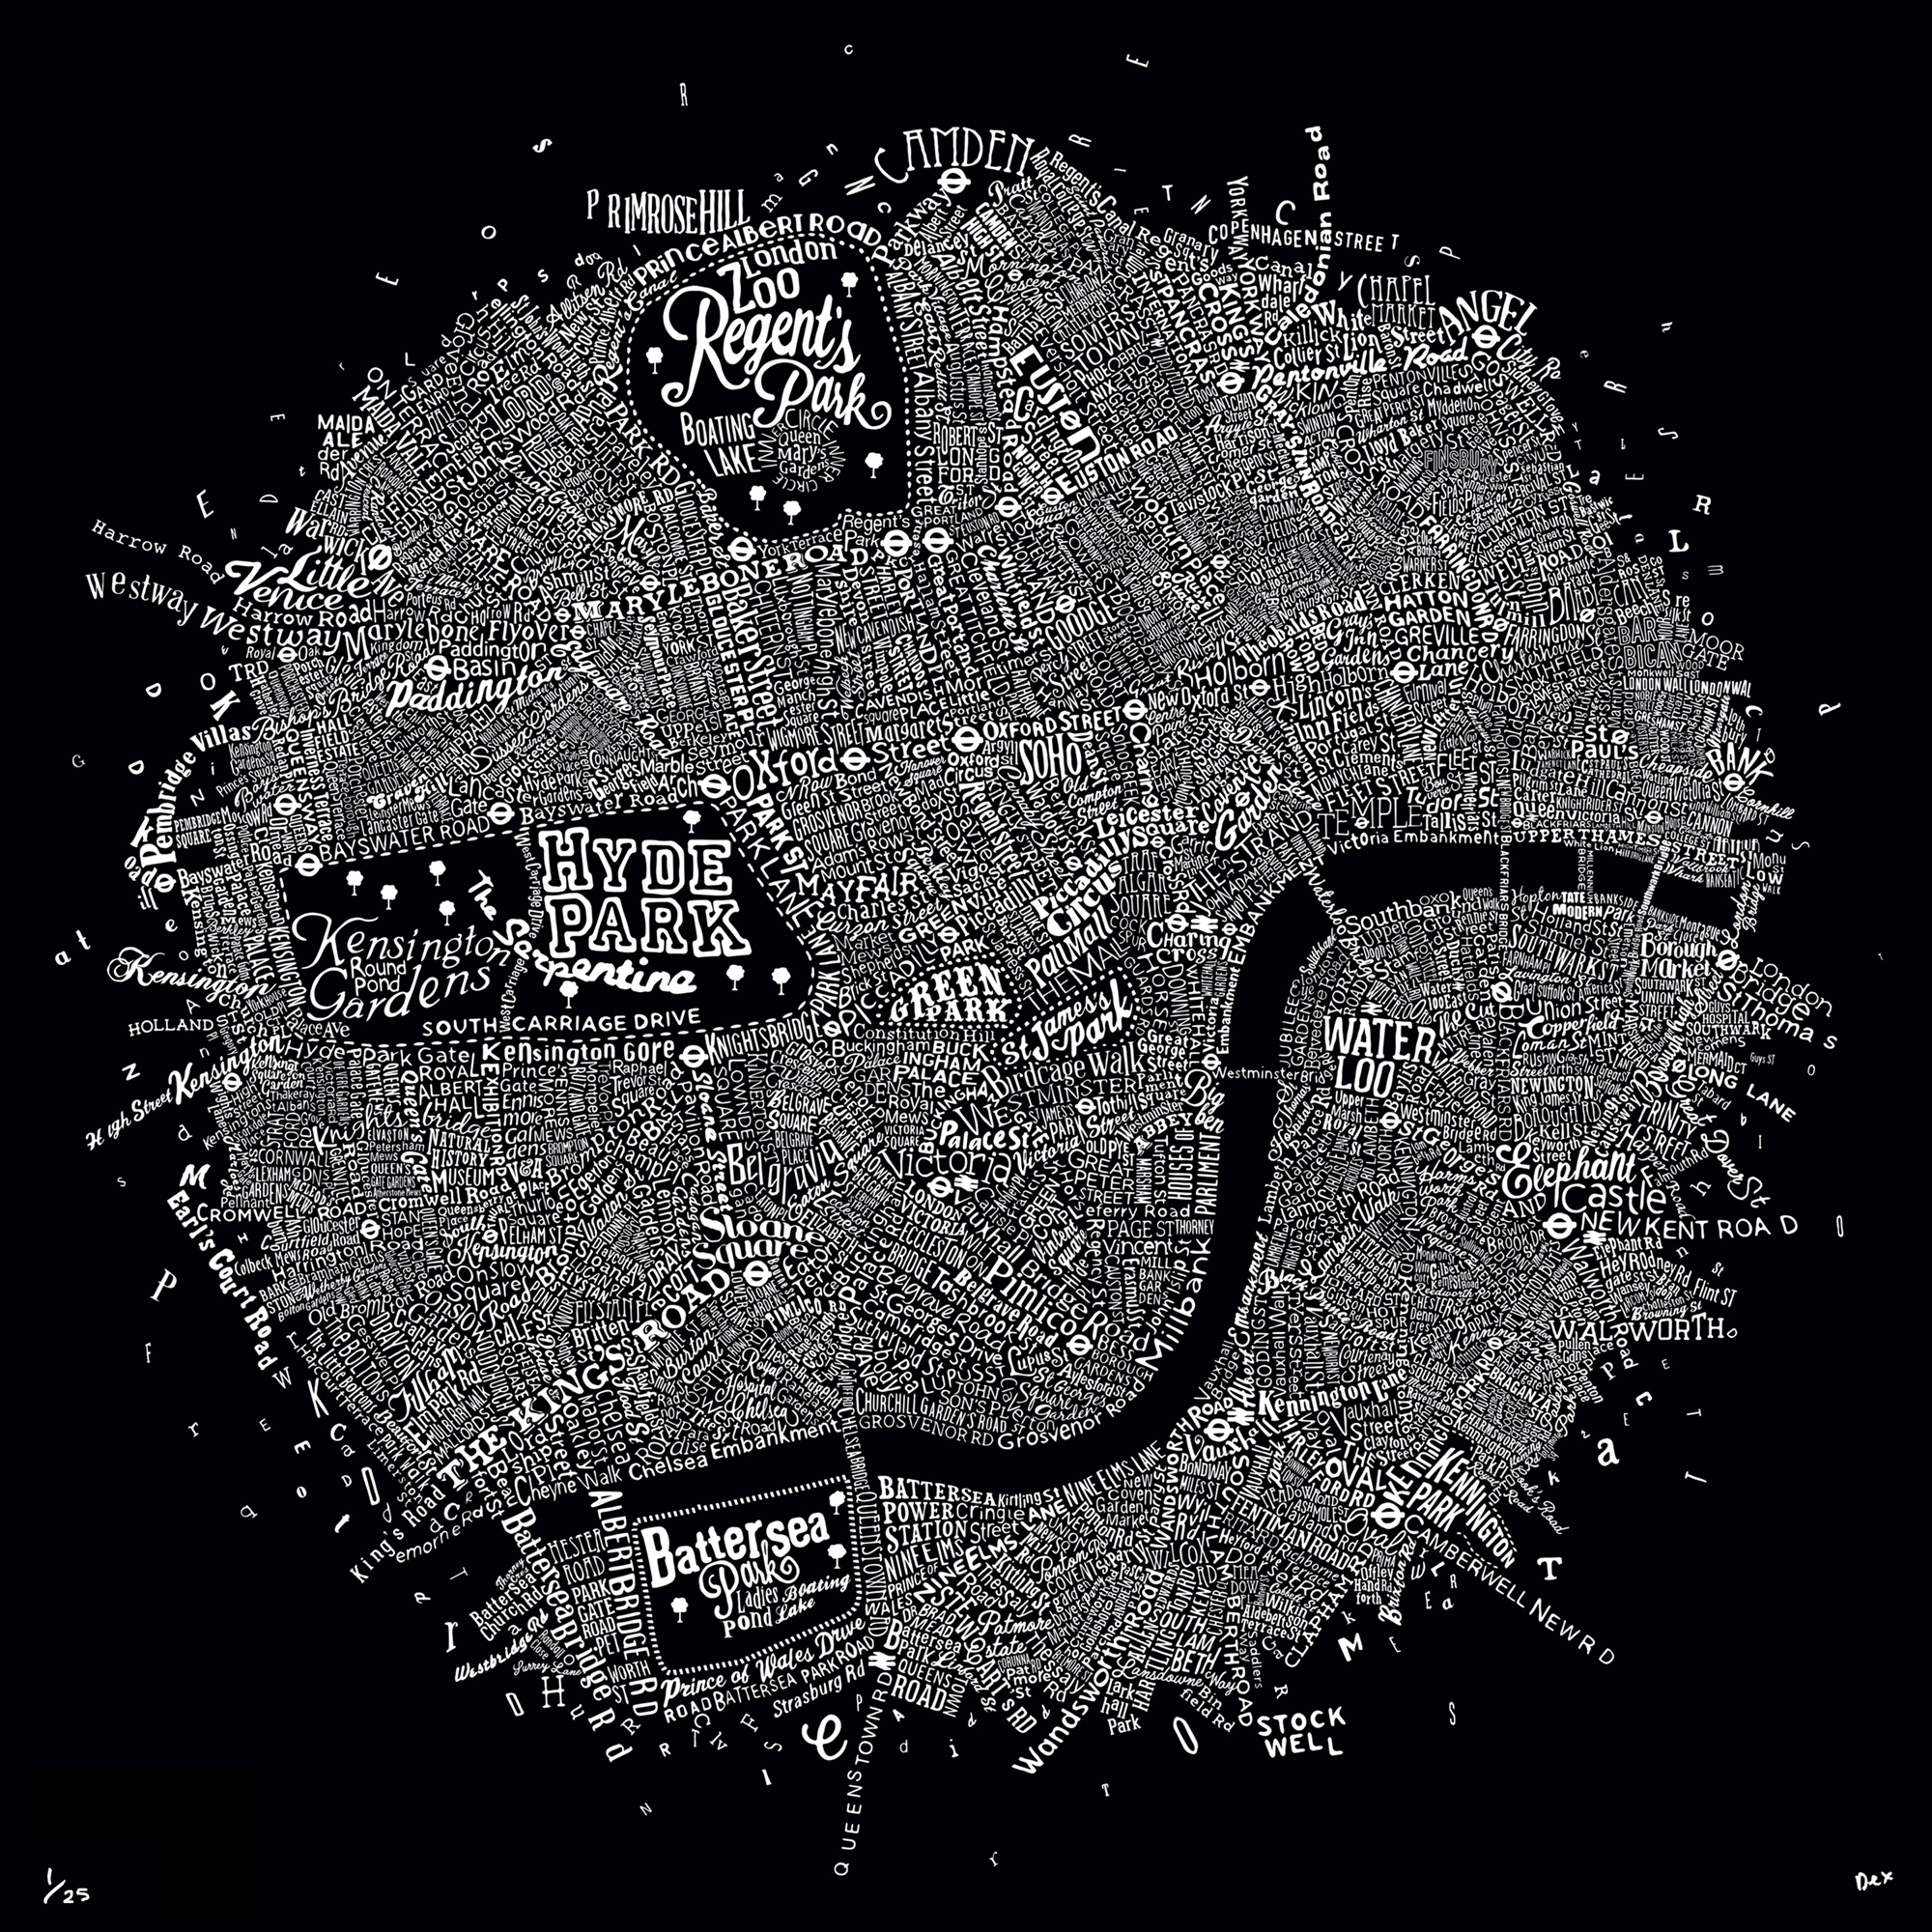 A typographic map of Greater London